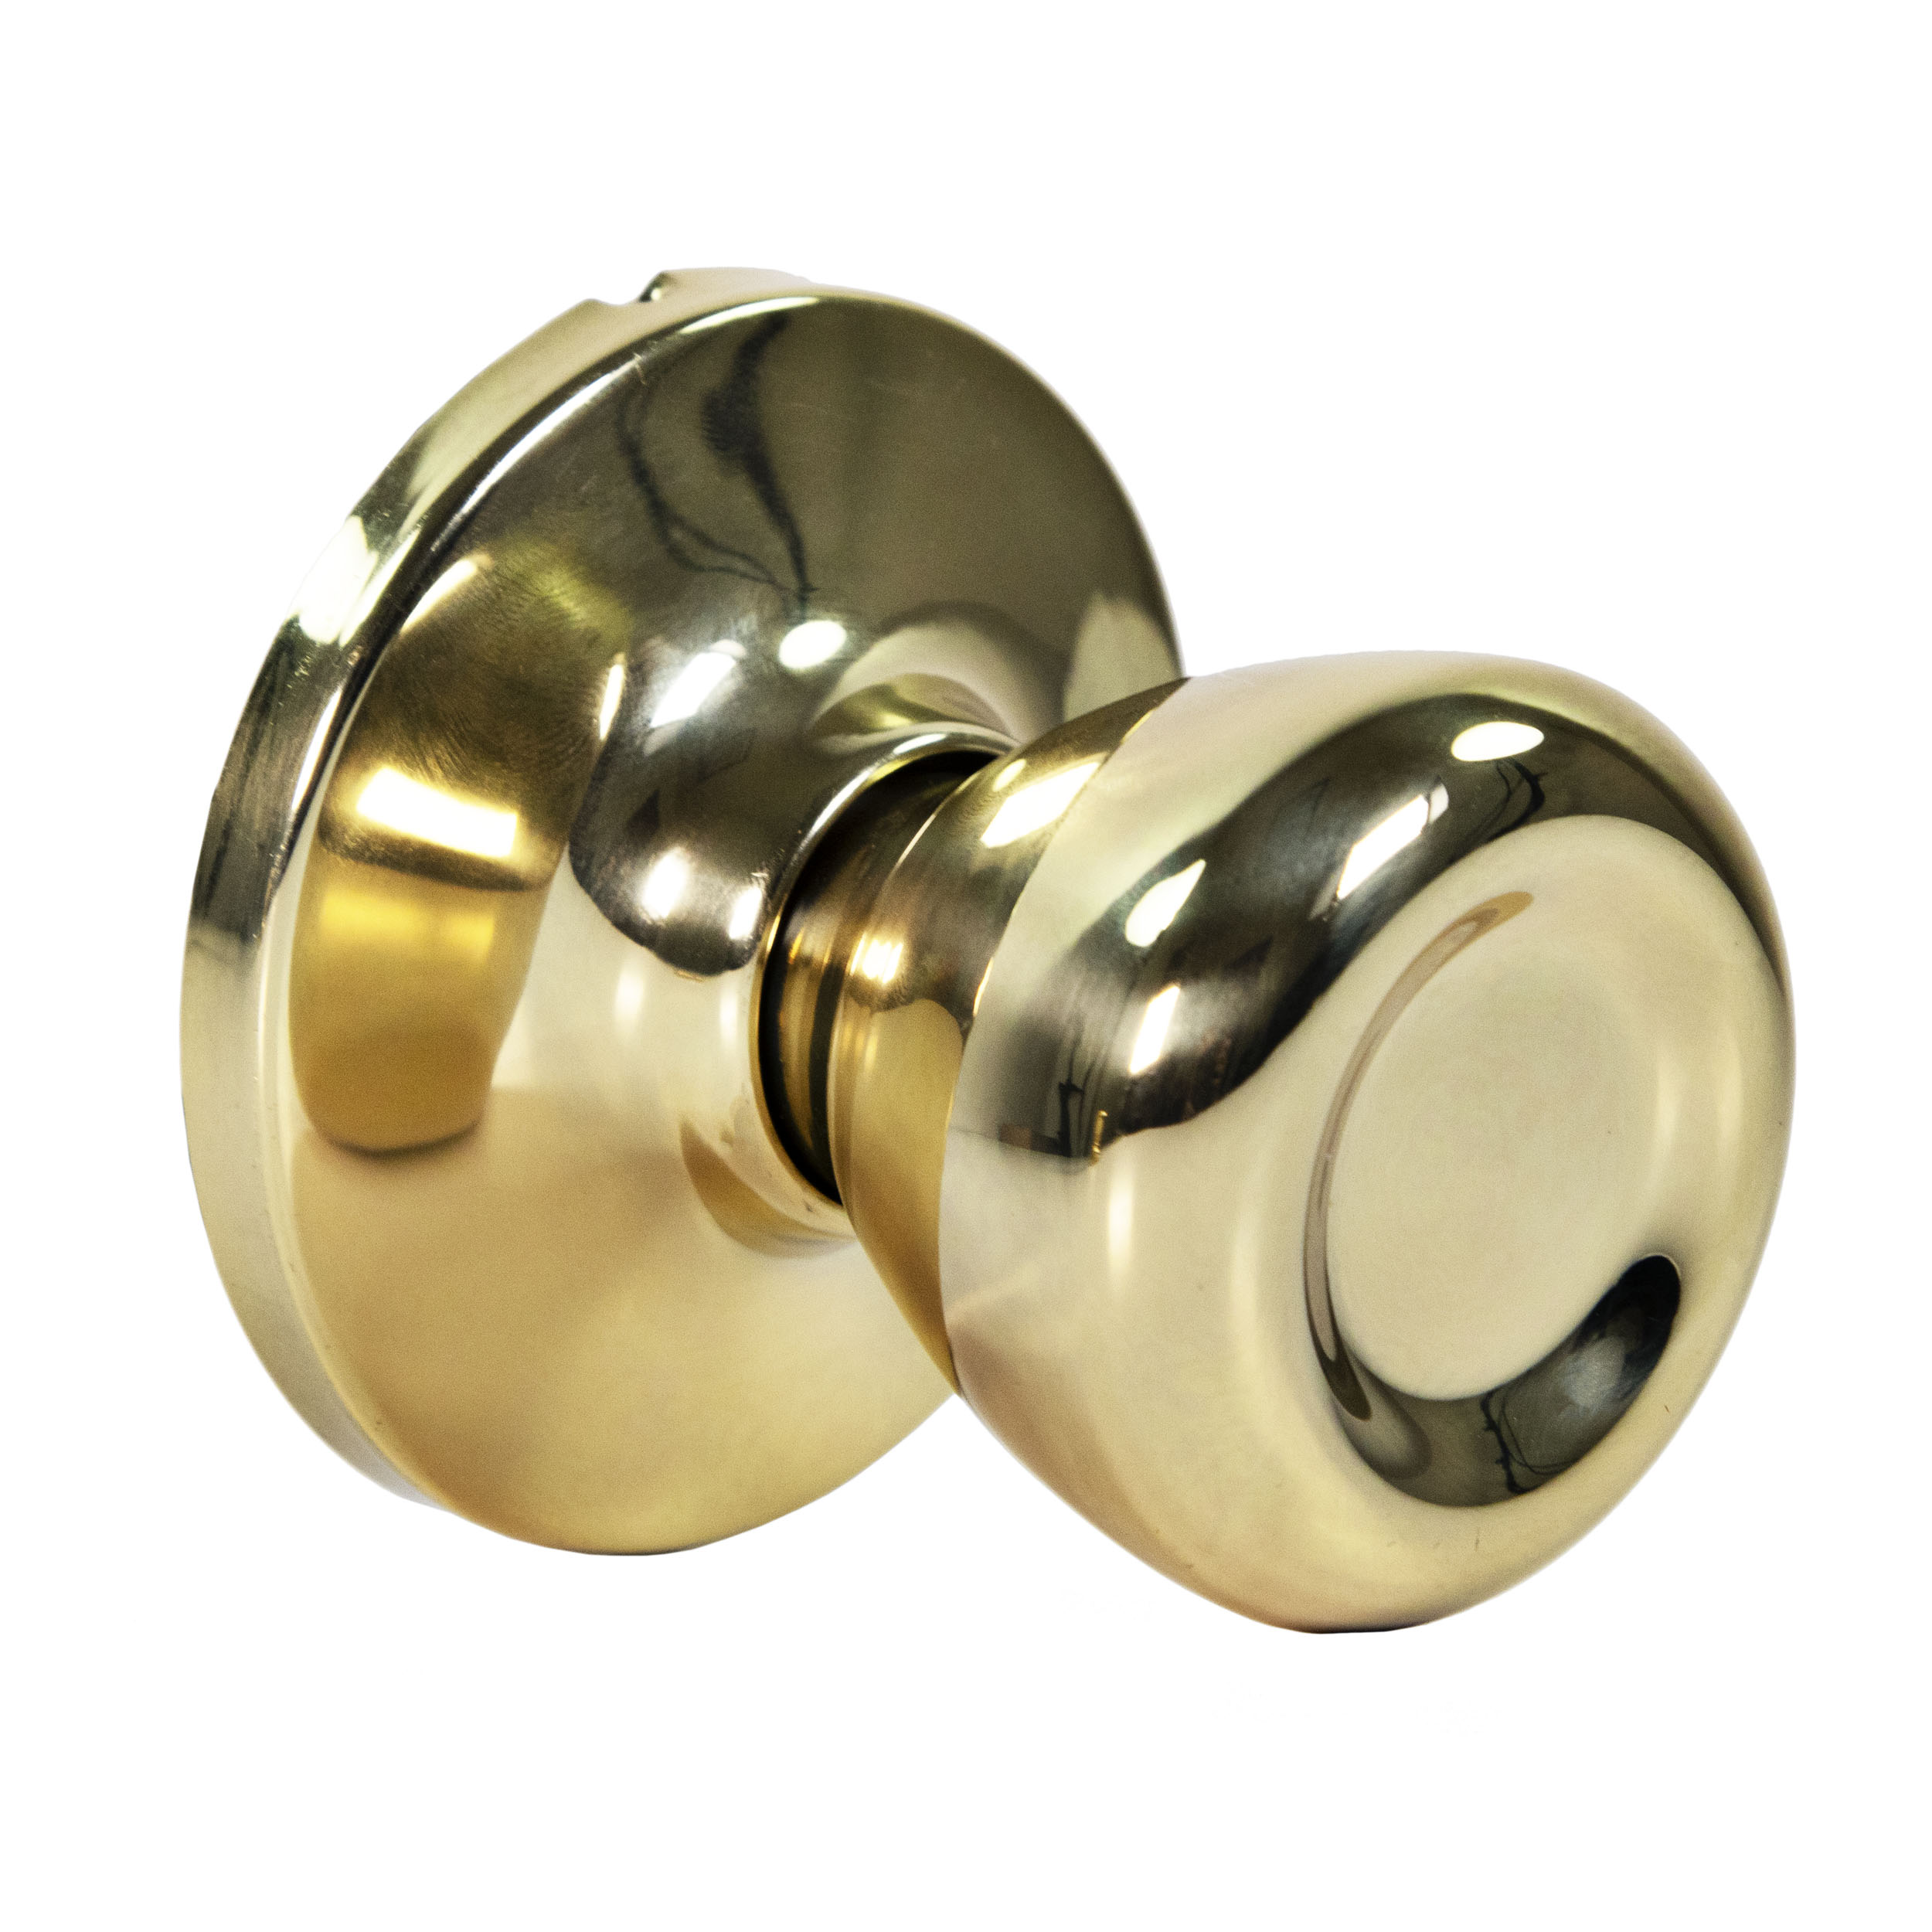 Ultra Security Rittenhouse Hall and Closet Lockset - Door Knob Hall and Closet Passage Non-Lockable Lockset, Fits 1-3/8 Inch to 1-3/4 Inch Door Thickness (Polished Brass Finish, 1 Pack) - image 1 of 11